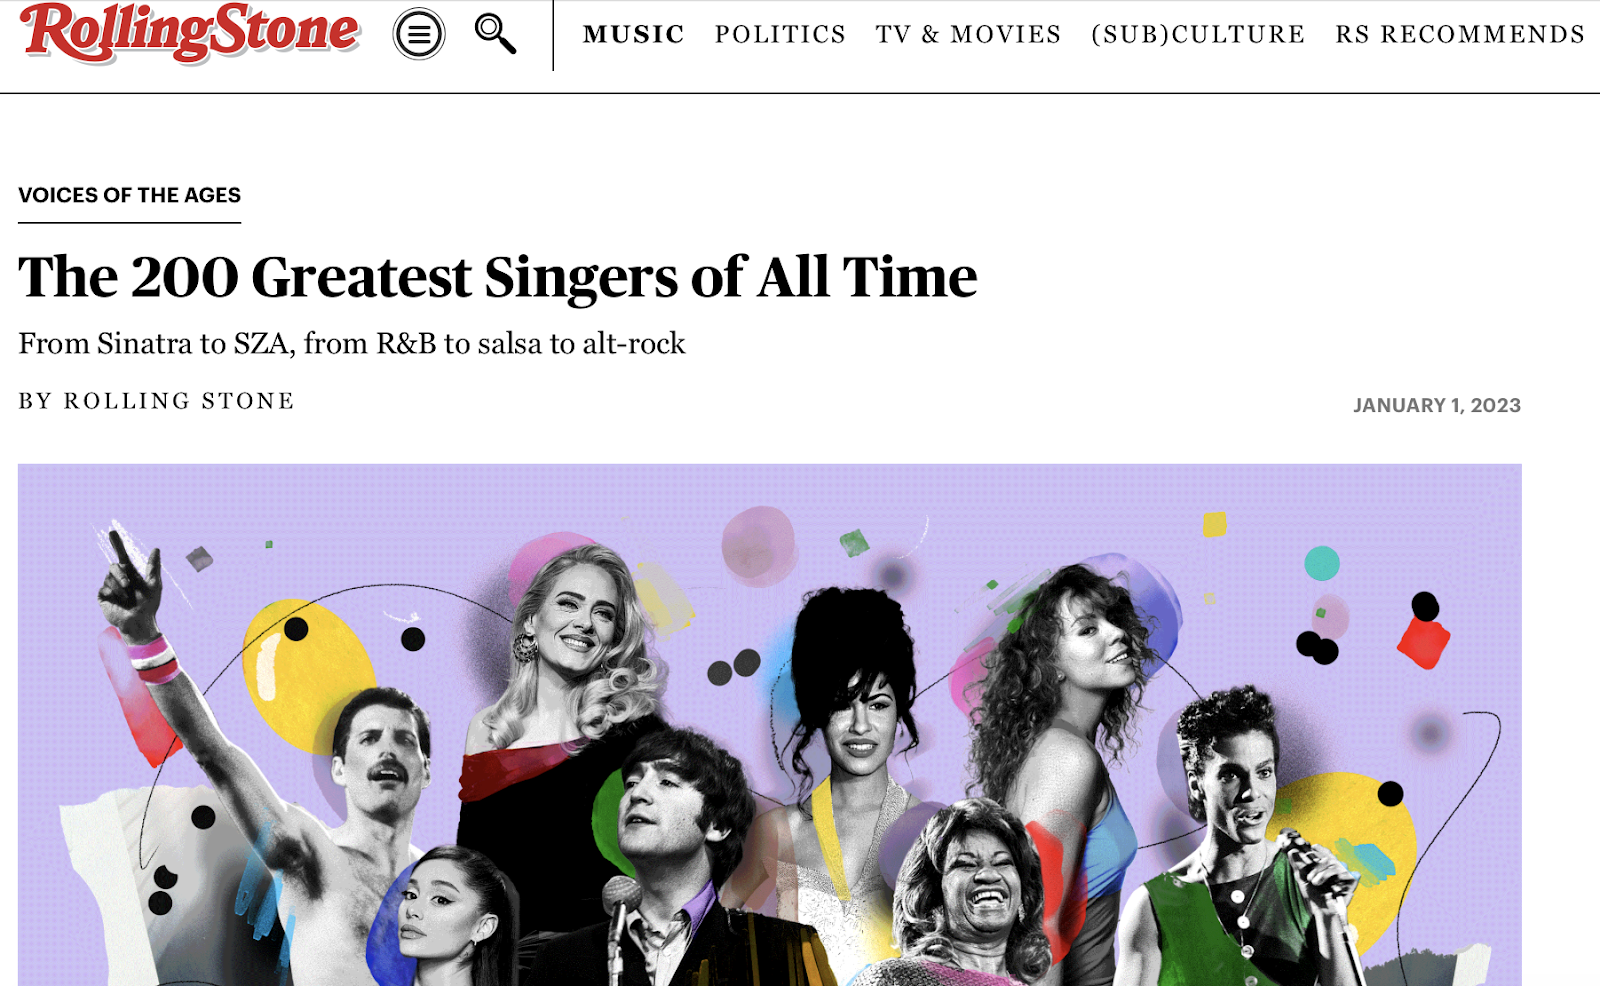 Rolling Stone "The 200 Greatest Singers of All Time" 